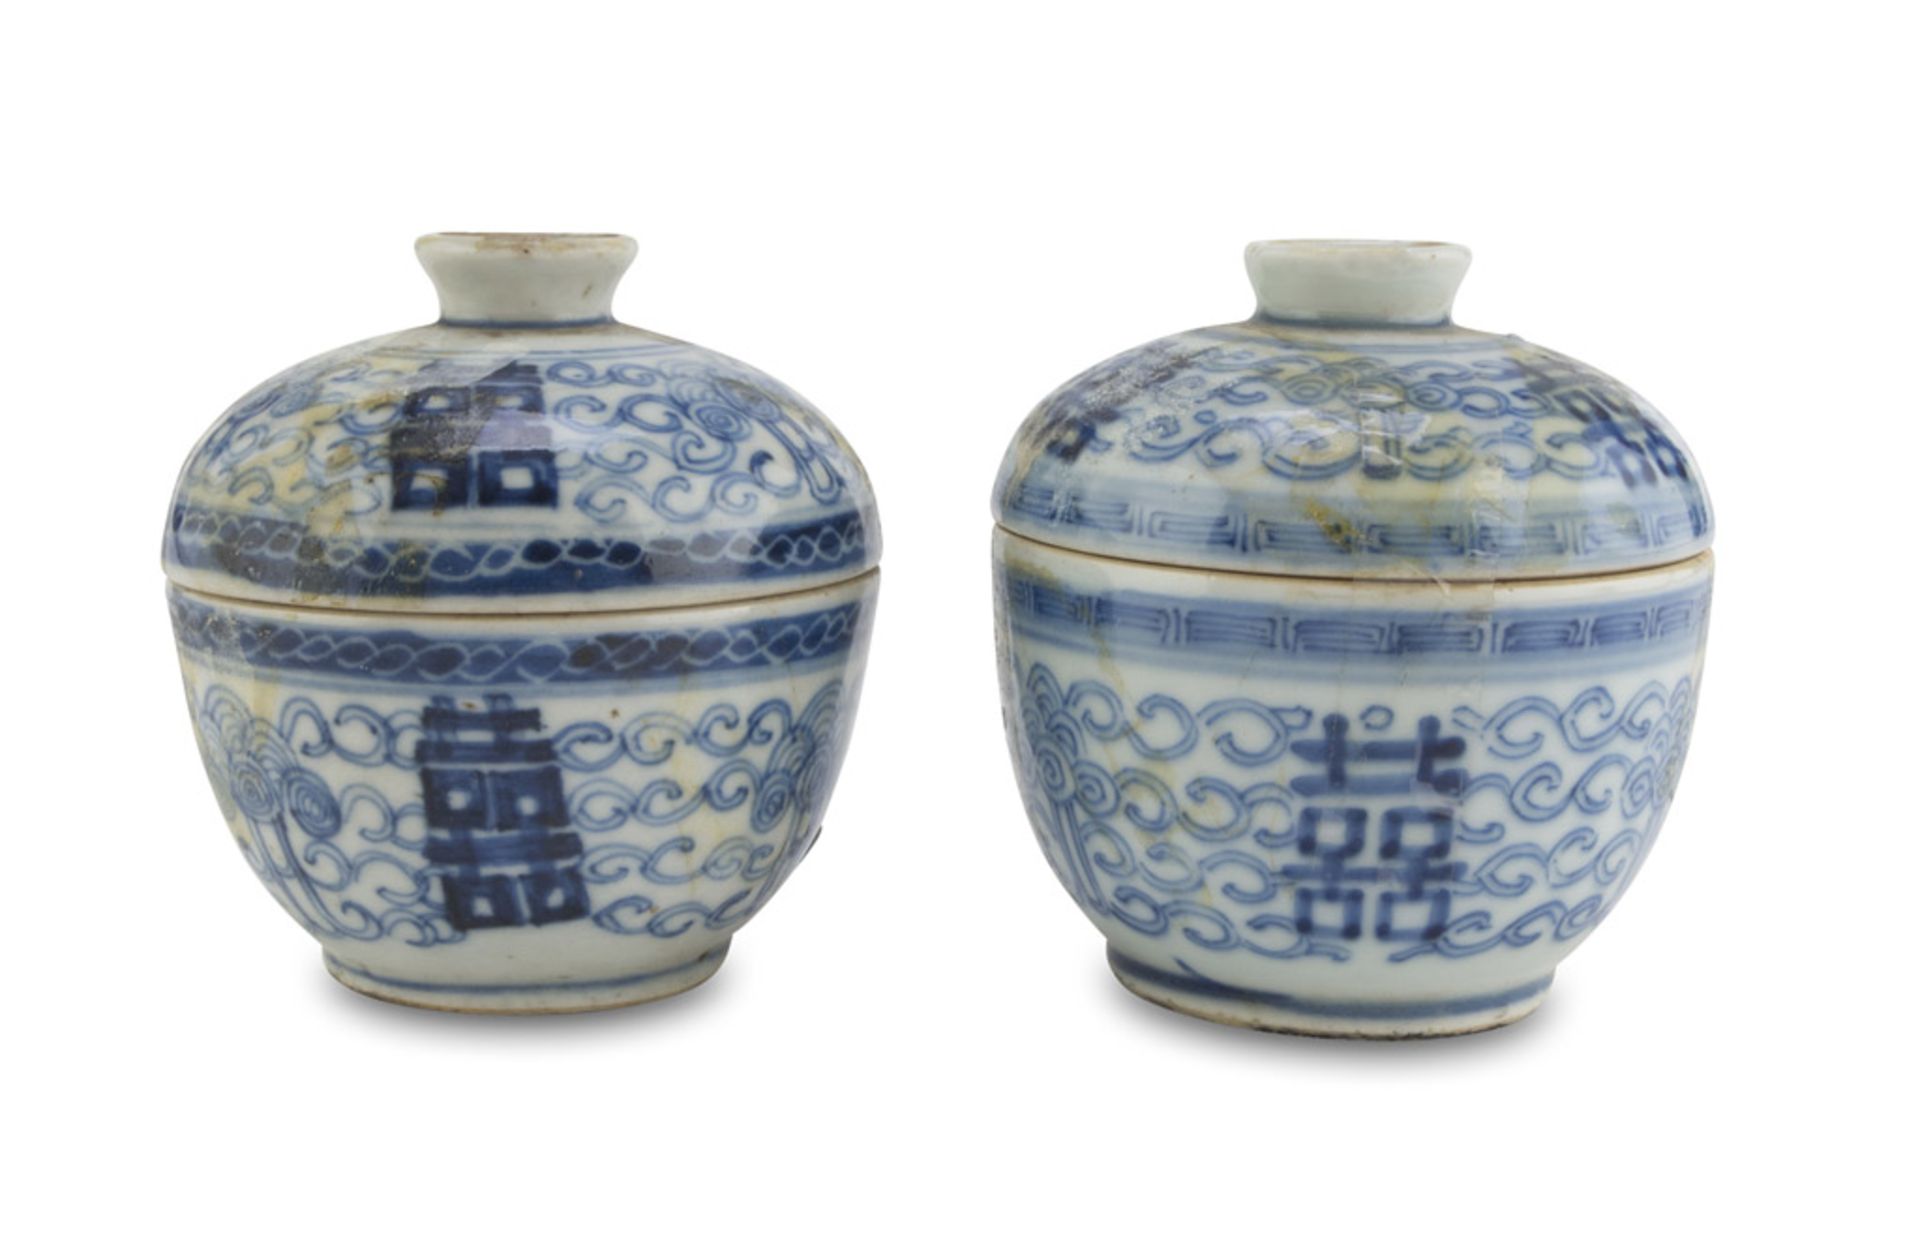 A PAIR OF WHITE AND BLUE PORCELAIN BOWLS, CHINA 19TH CENTURY decorated with floral interlacements